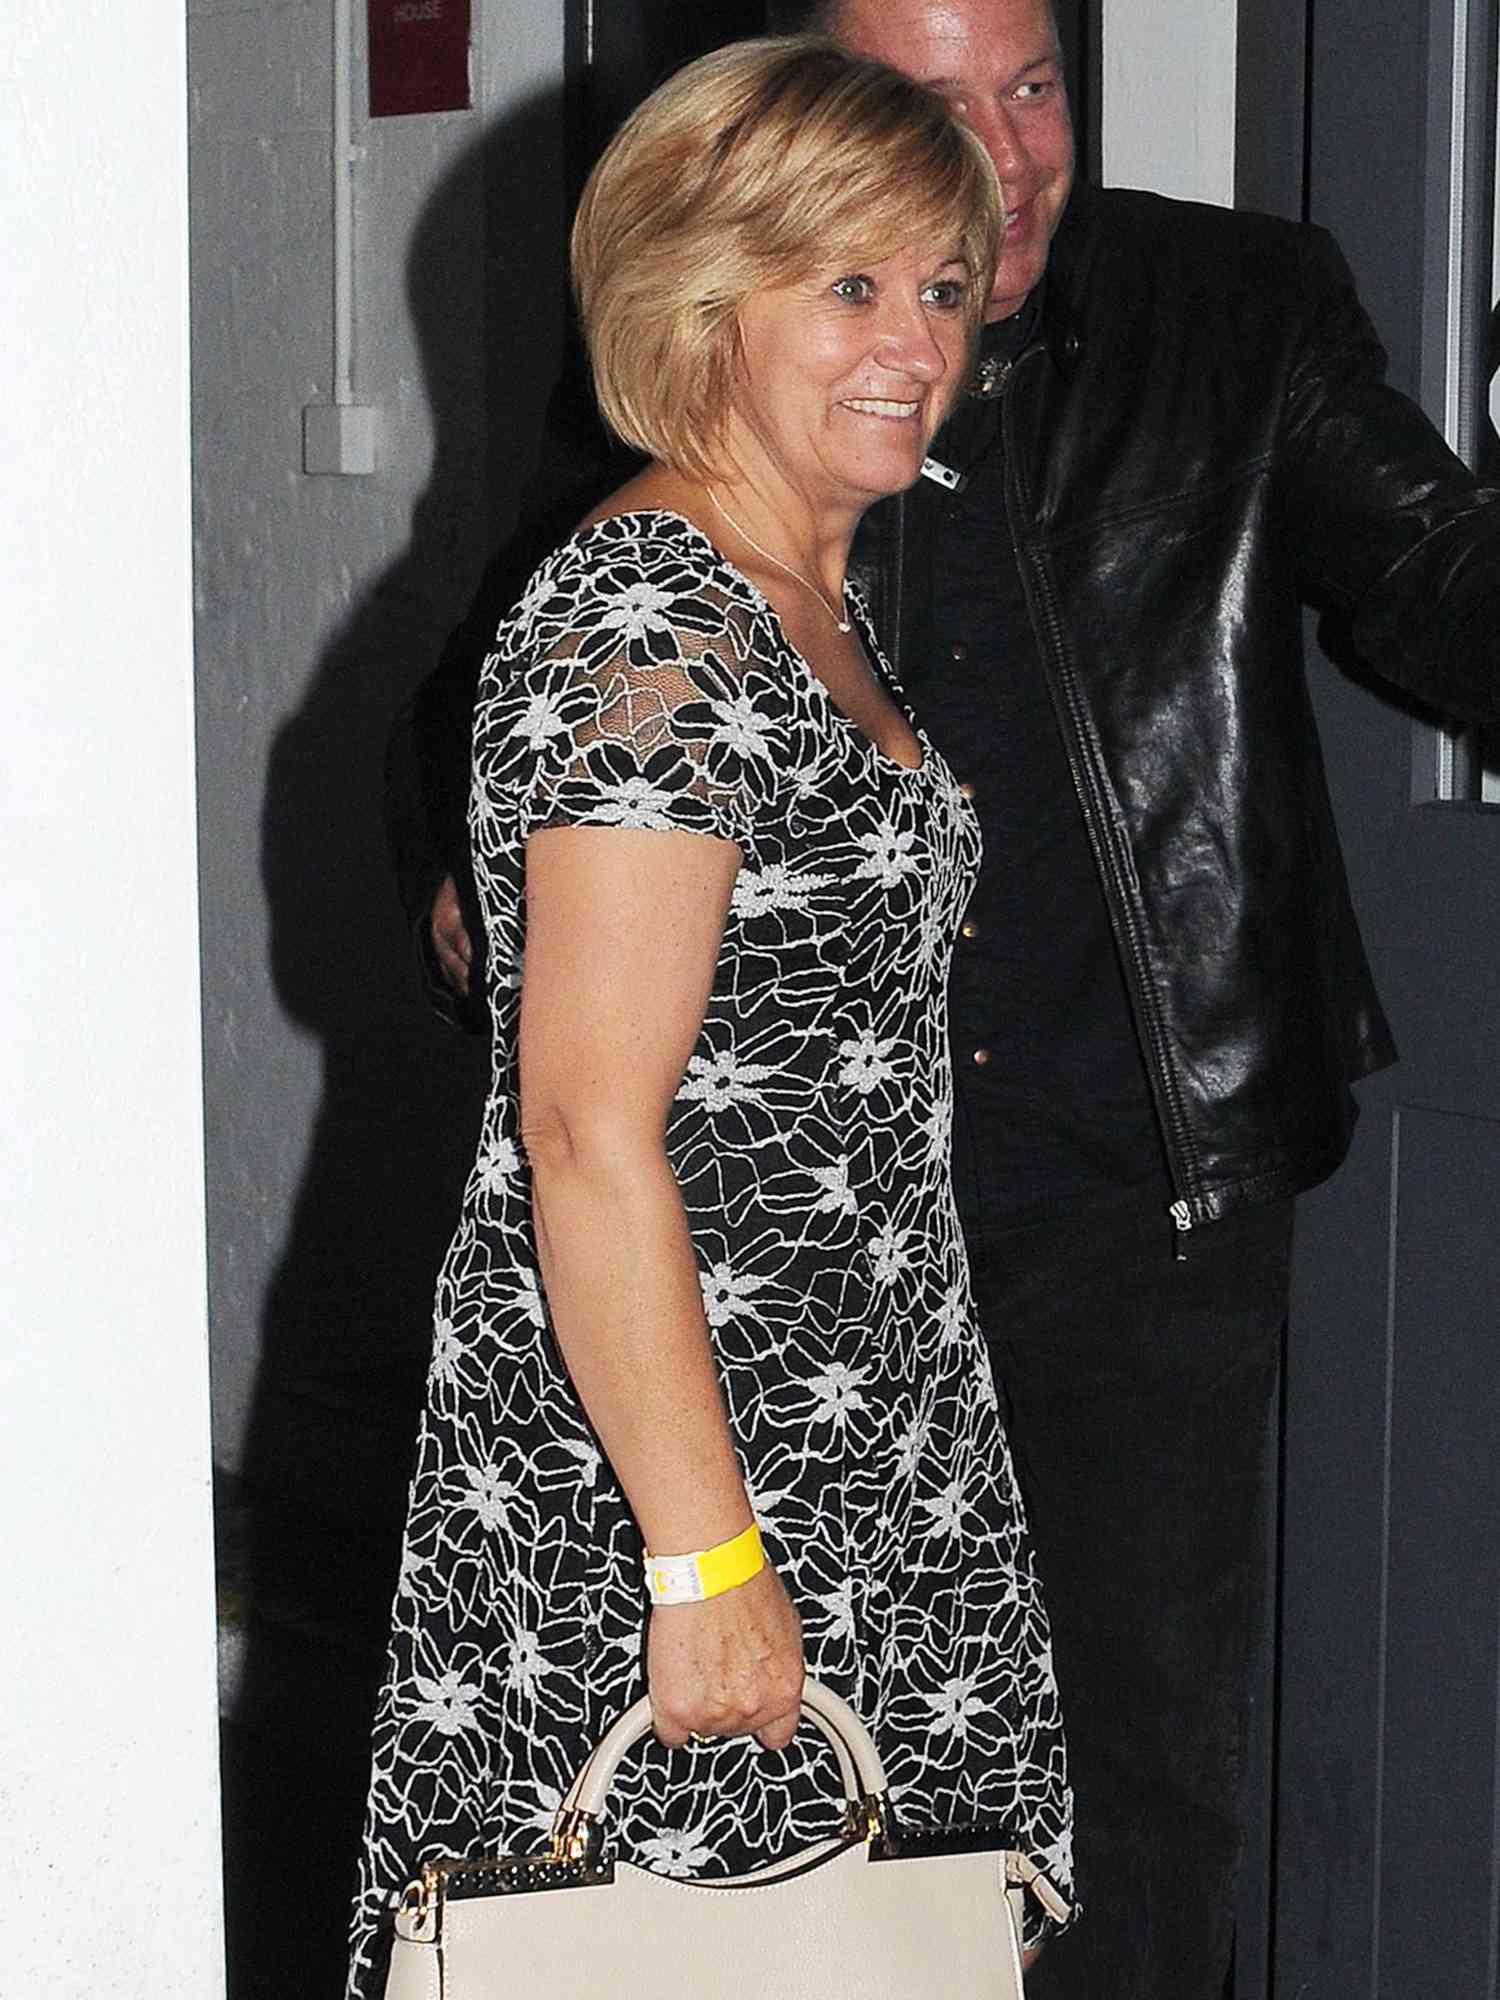 Maura Gallagher at Niall Horan's 21st Birthday Party on September 6, 2014 in London.